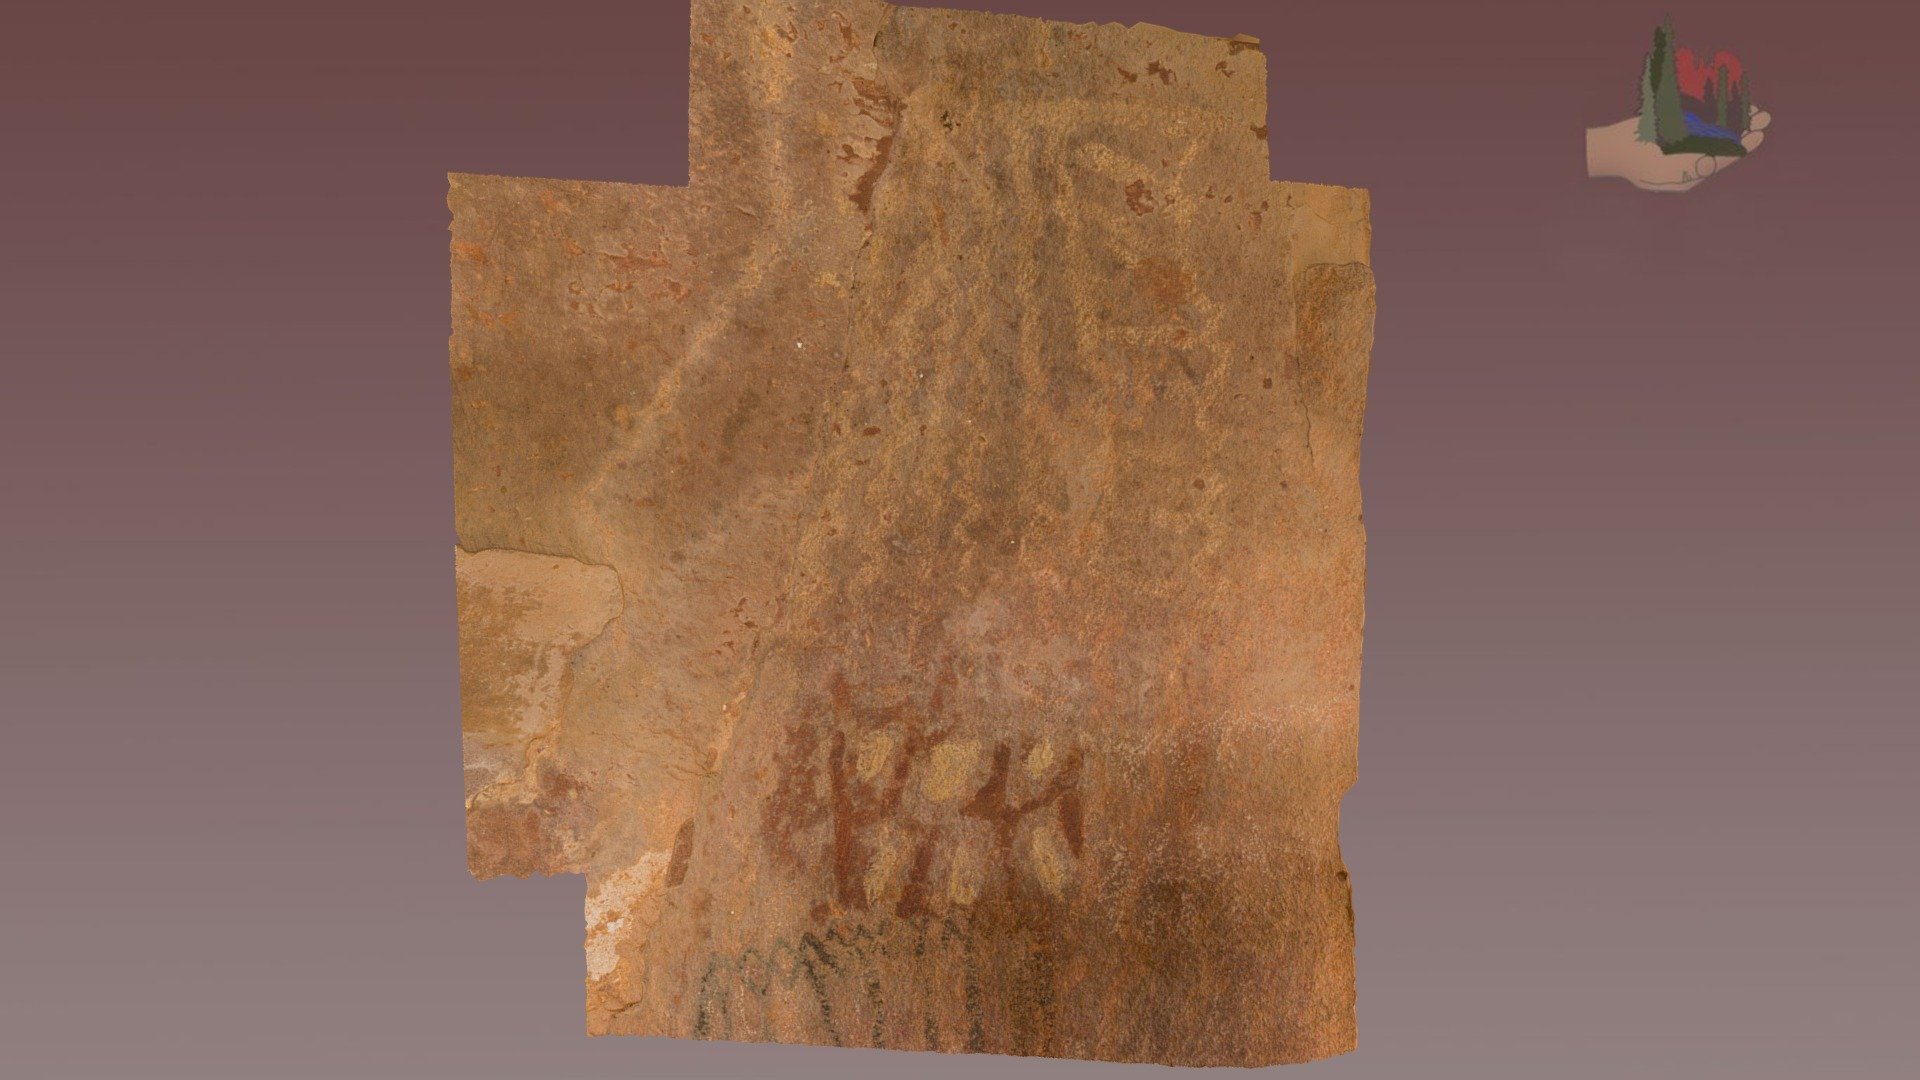 fs1849 palatki grotto panel 15 detail - 3d model fofsedona b96365a small portion duo tone archaic snake image association sinagua yavapai imagery high up rock face above glyph additions vertical line array typically associated water symbols there charcoal copy below complex art multiple instances superposition apache historic graffiti part ongoing project evaluate younger over older petroglyph scratching additional information red district coconino forest can found following web sites http wwwsedonaredrocktrailsorg wwwfsusdagov recmain recreation volunteer opportunities including creation models other projects wwwfriendsoftheforestsedonaorg 3D print model - Mito3D